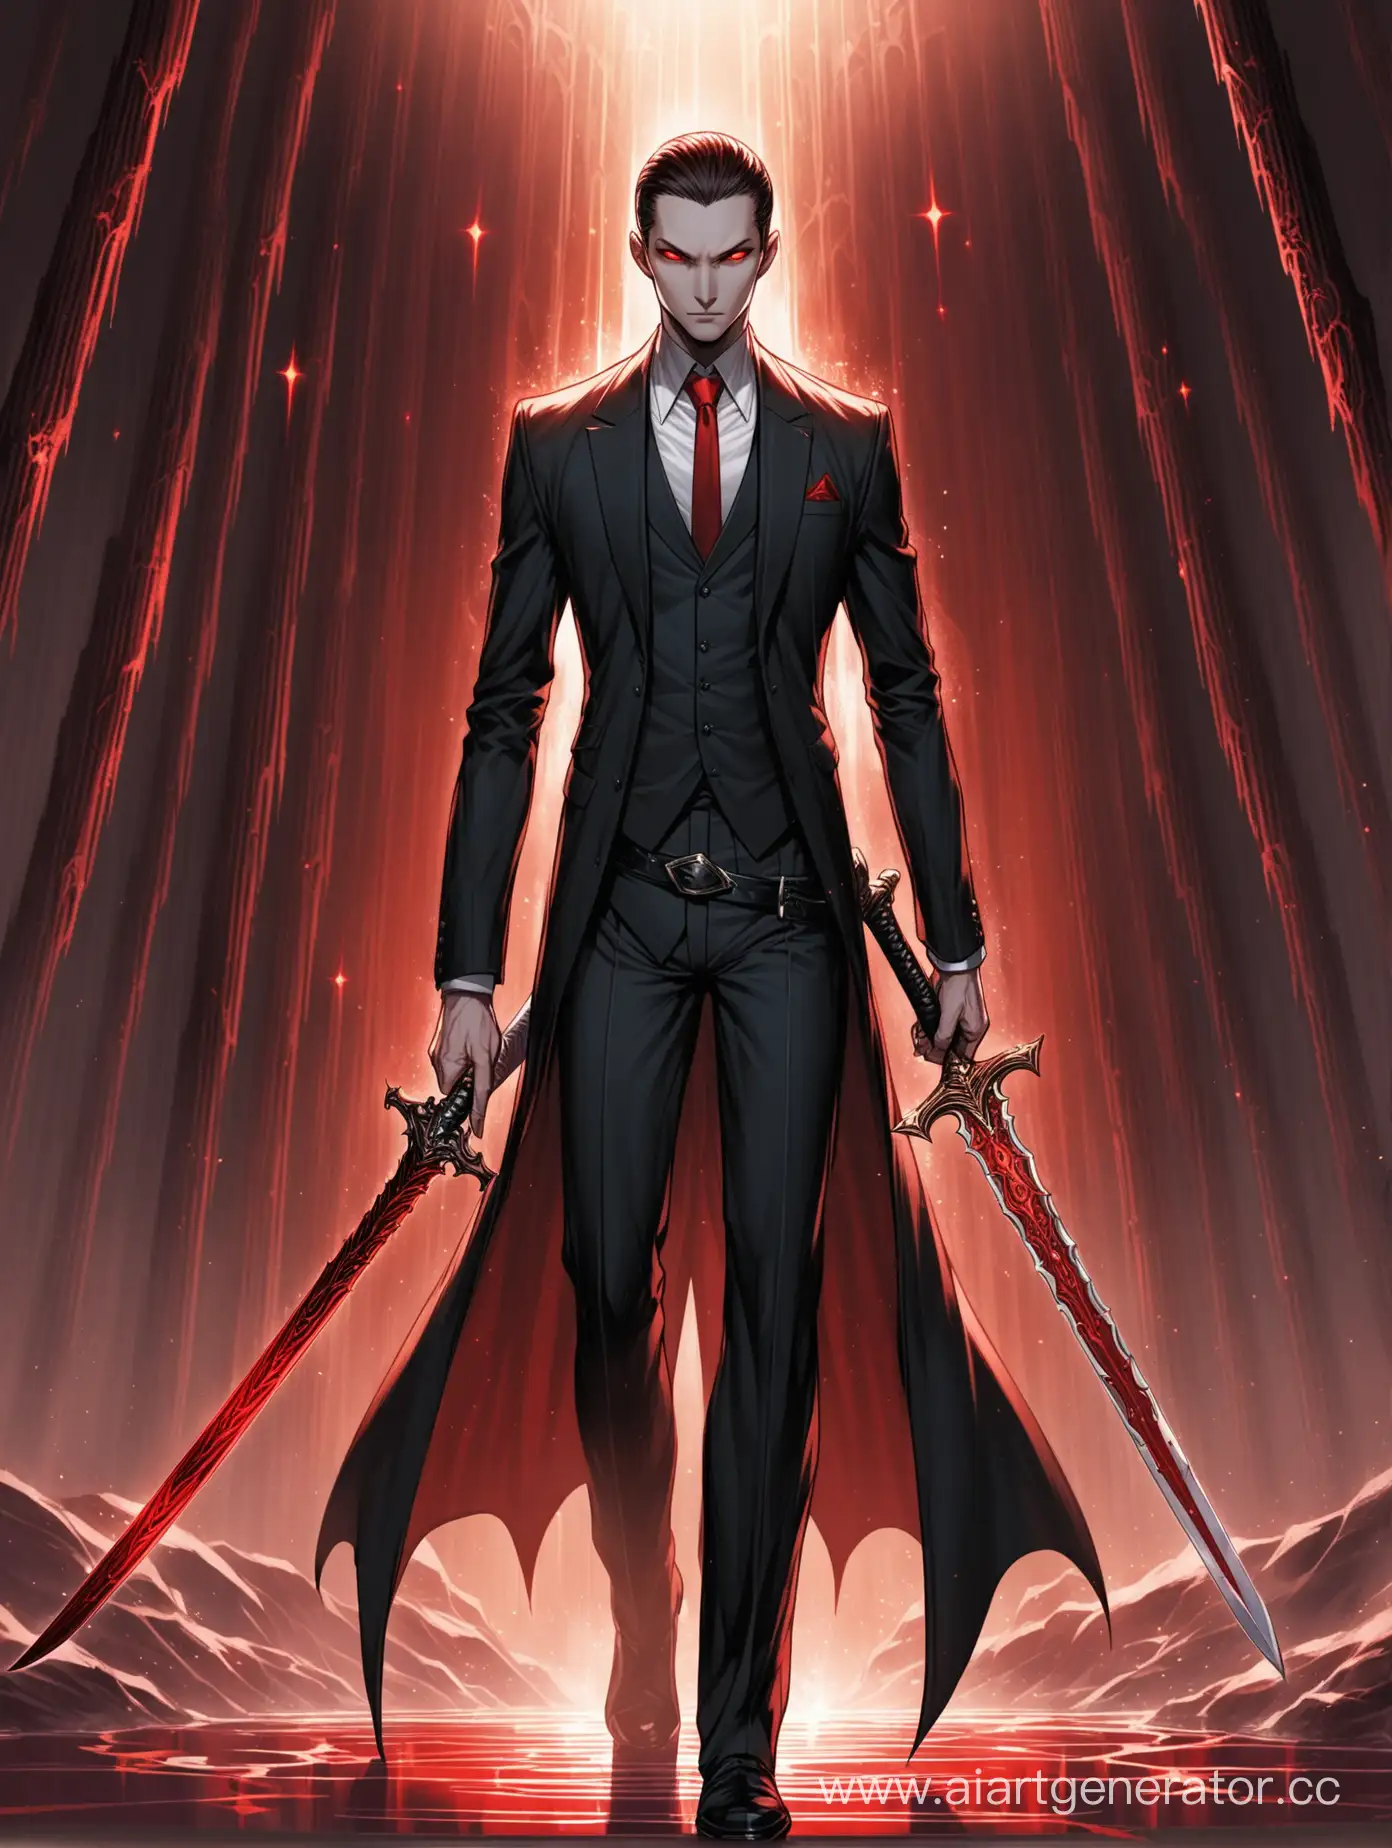 Dhampir-Swordsman-in-Classic-Suit-with-Bright-Red-Eyes